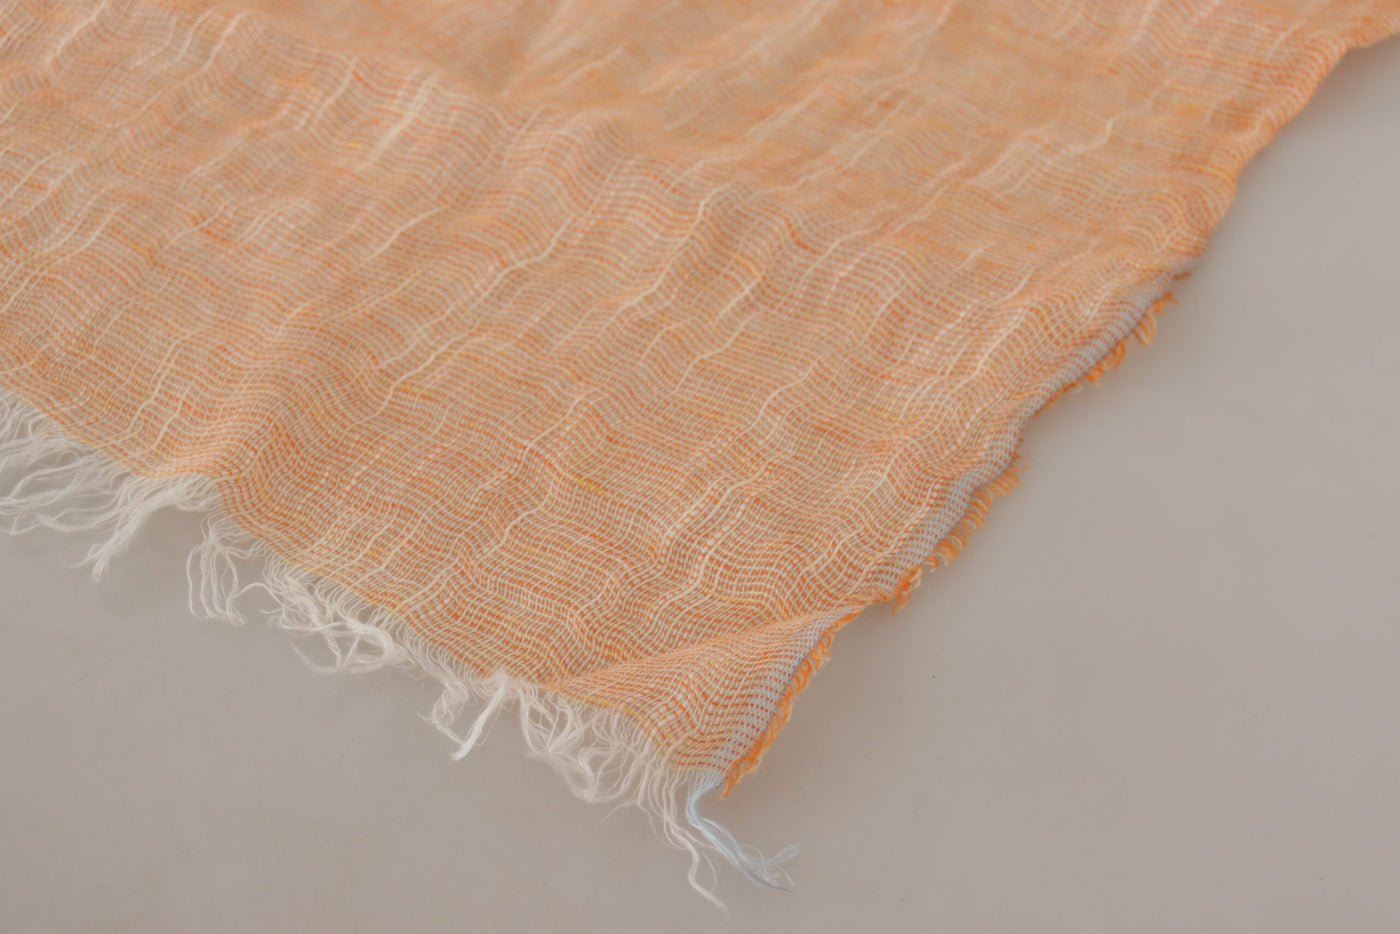 Malo Peach Linen Knitted Shawl Wrap Fringes Scarf